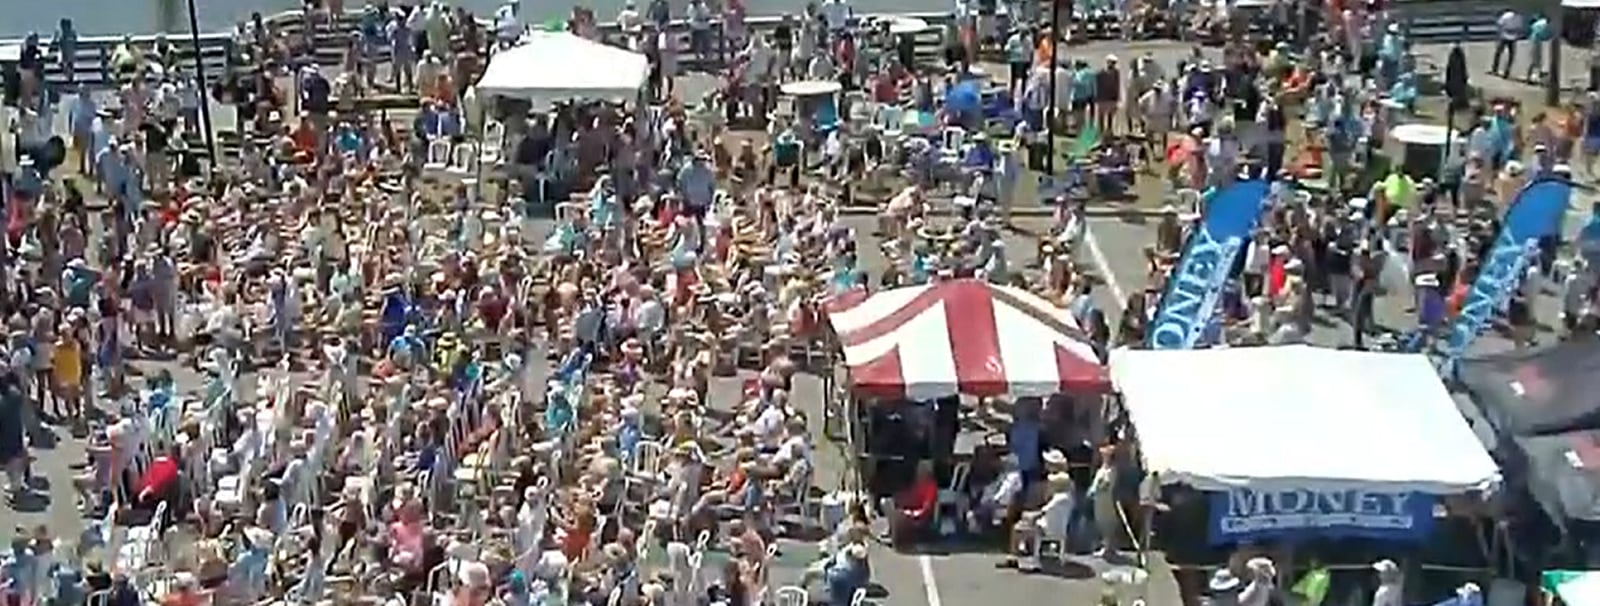 Shrimp Fest in Fernandina Beach canceled second year in a row due to